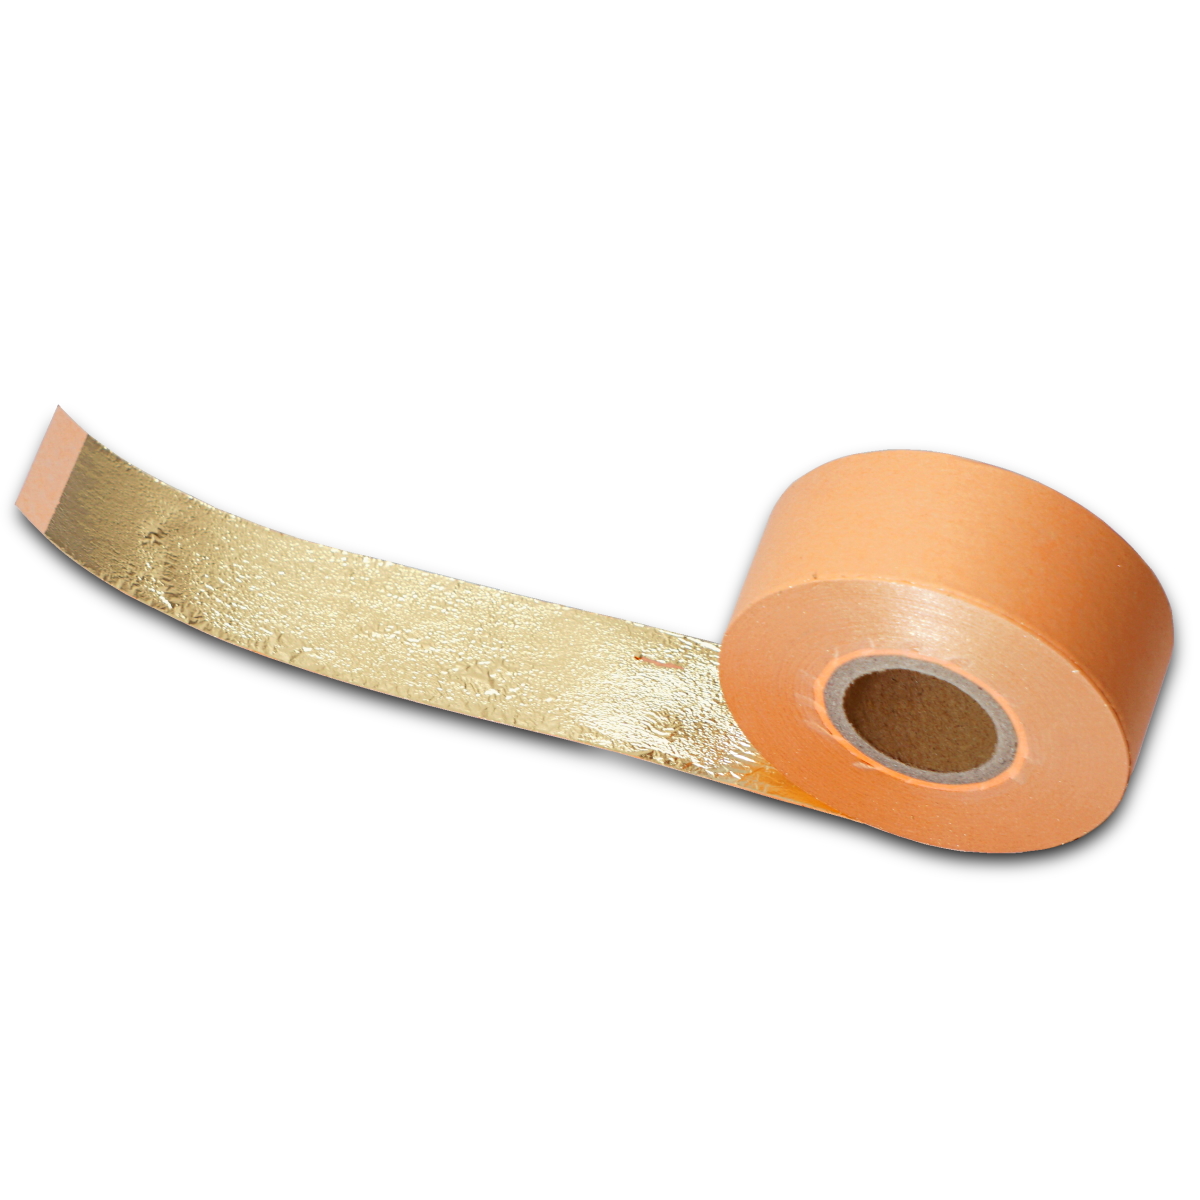 Image of 23K Genuine Gold Roll protected by an orange-colored tissue paper backing.